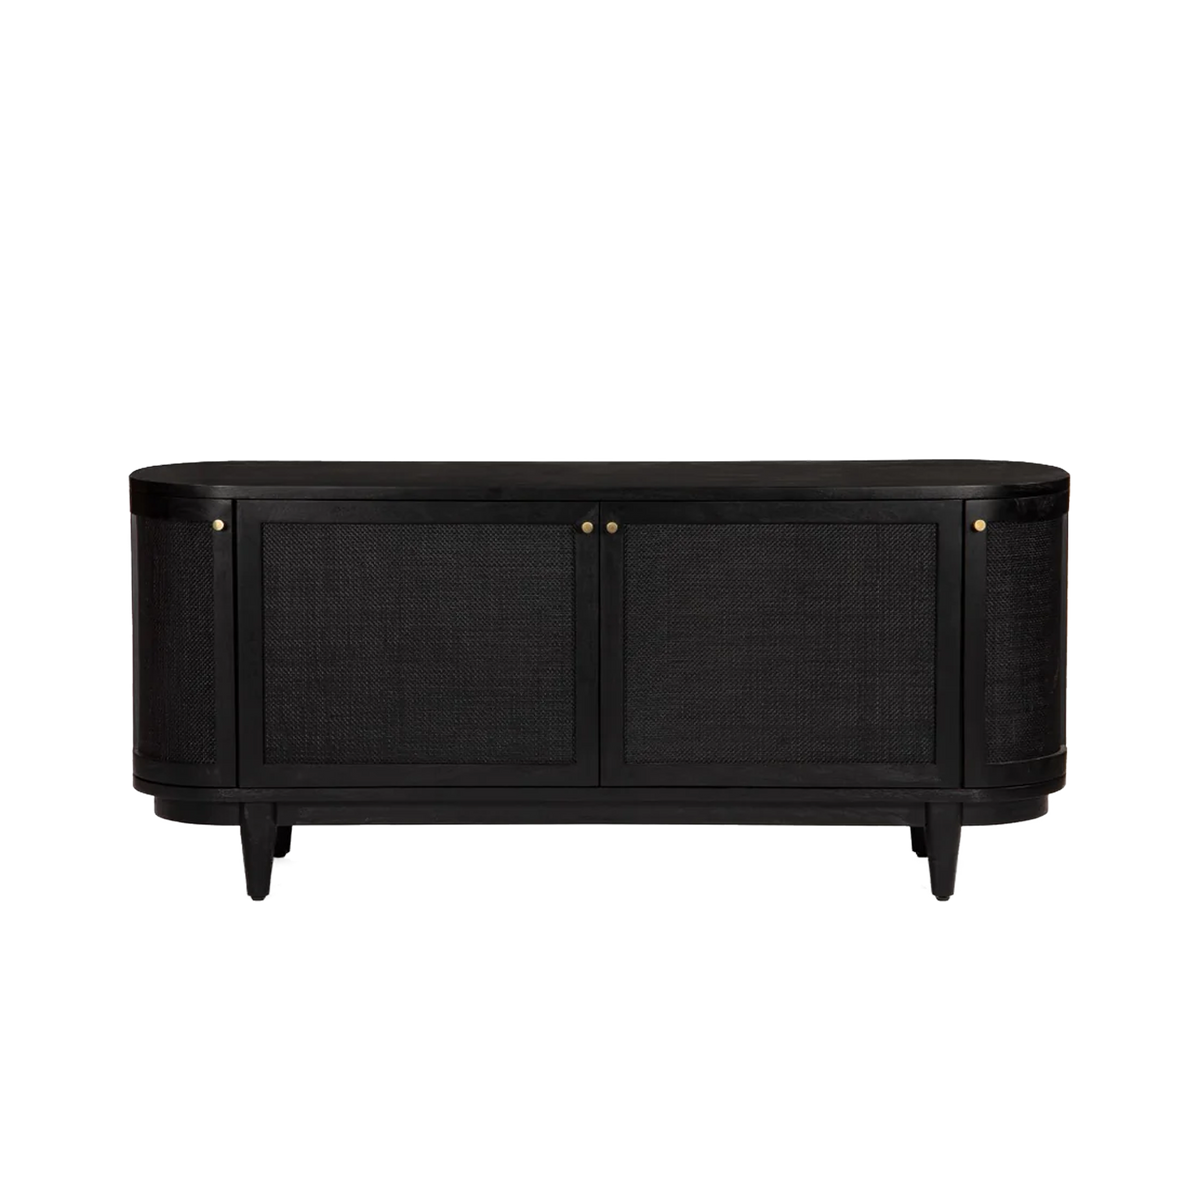 Embodying a blend of curves and natural materials, Hoffman Sideboard adds a touch of organic elegance to any living space.